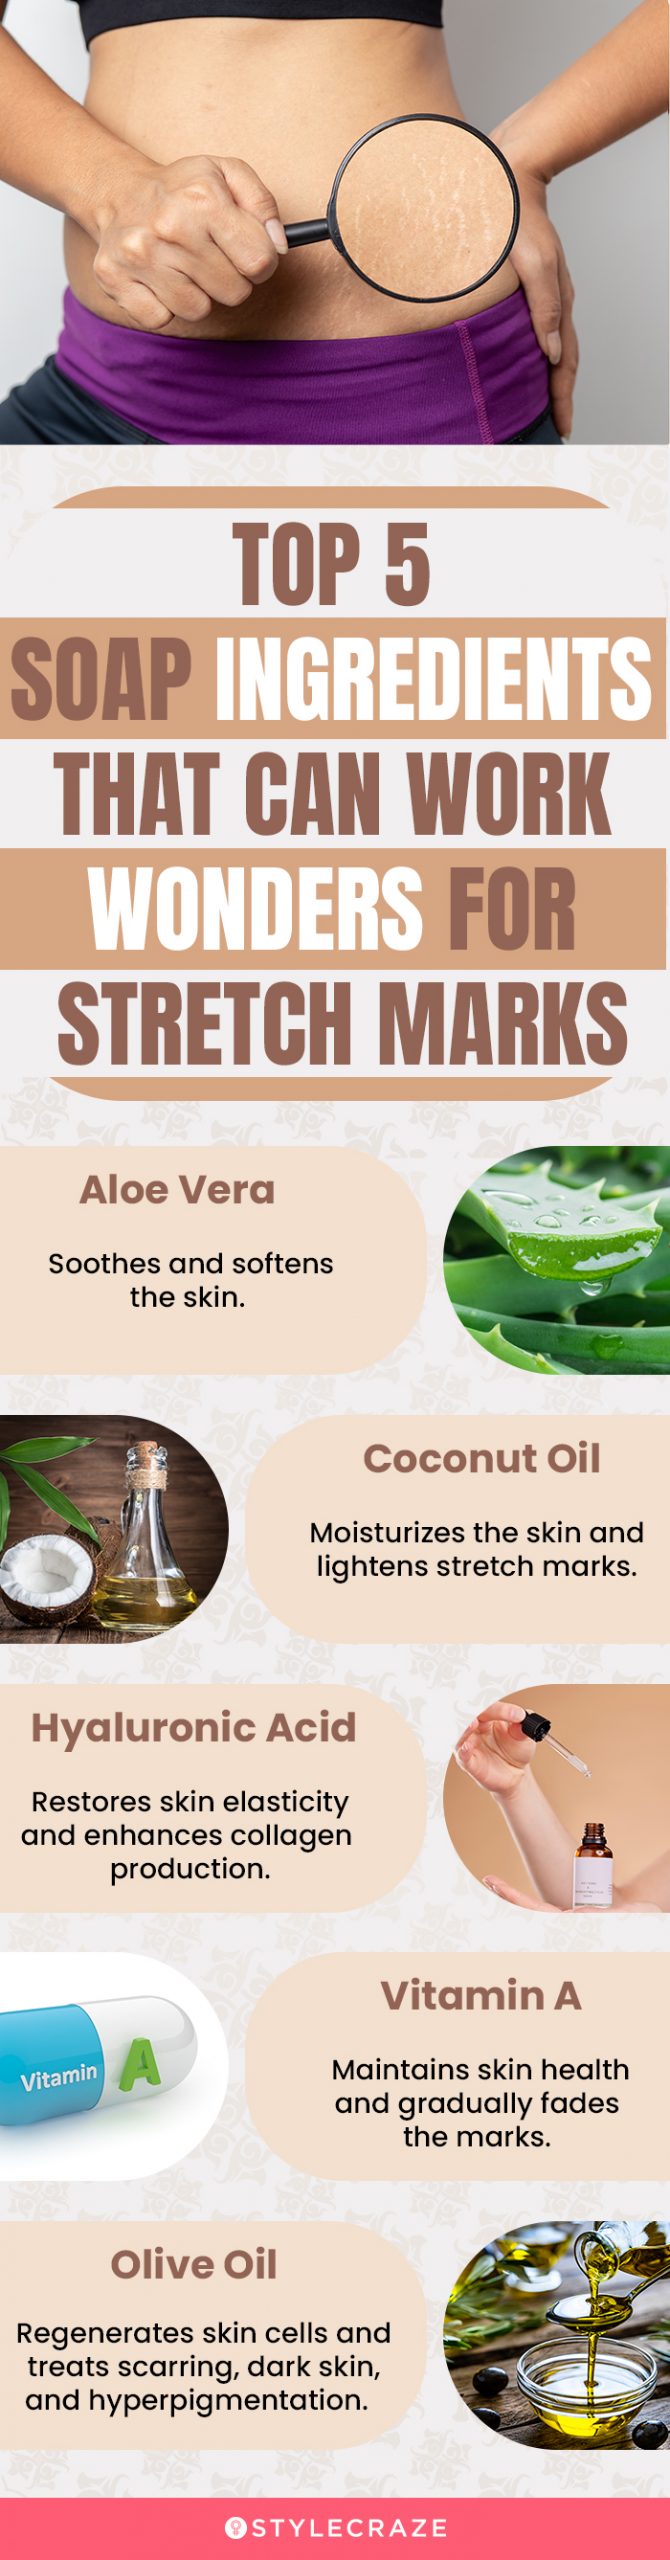 Top 5 Soap Ingredients That Can Work Wonders For Stretch Marks (infographic)